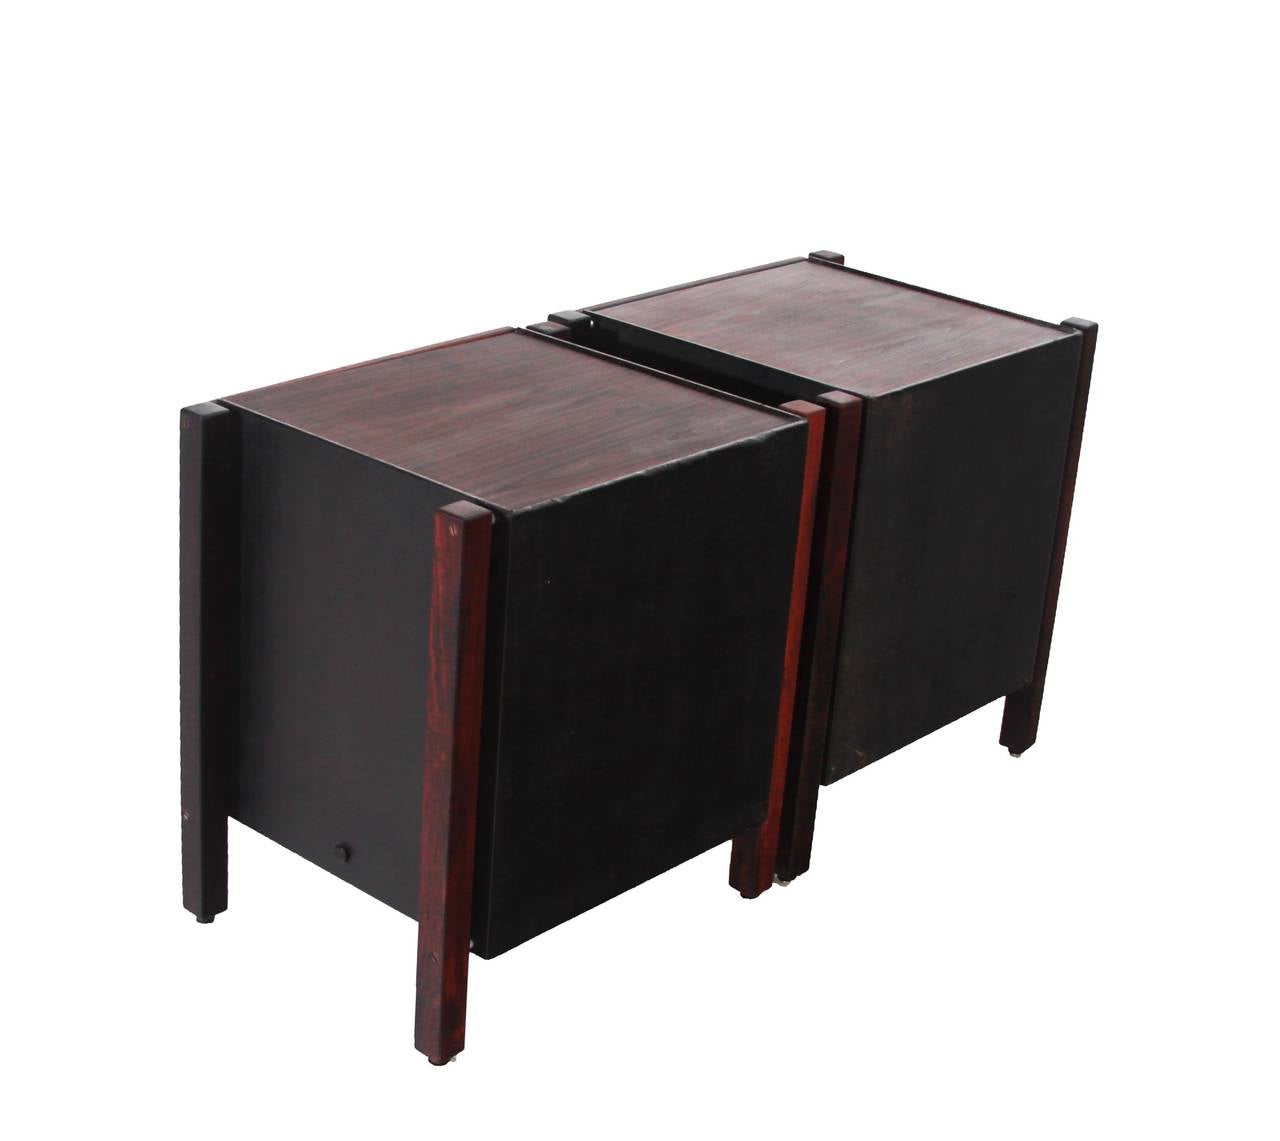 Brazilian Pair of Leather and Rosewood Side Tables by Jorge Zalszupin